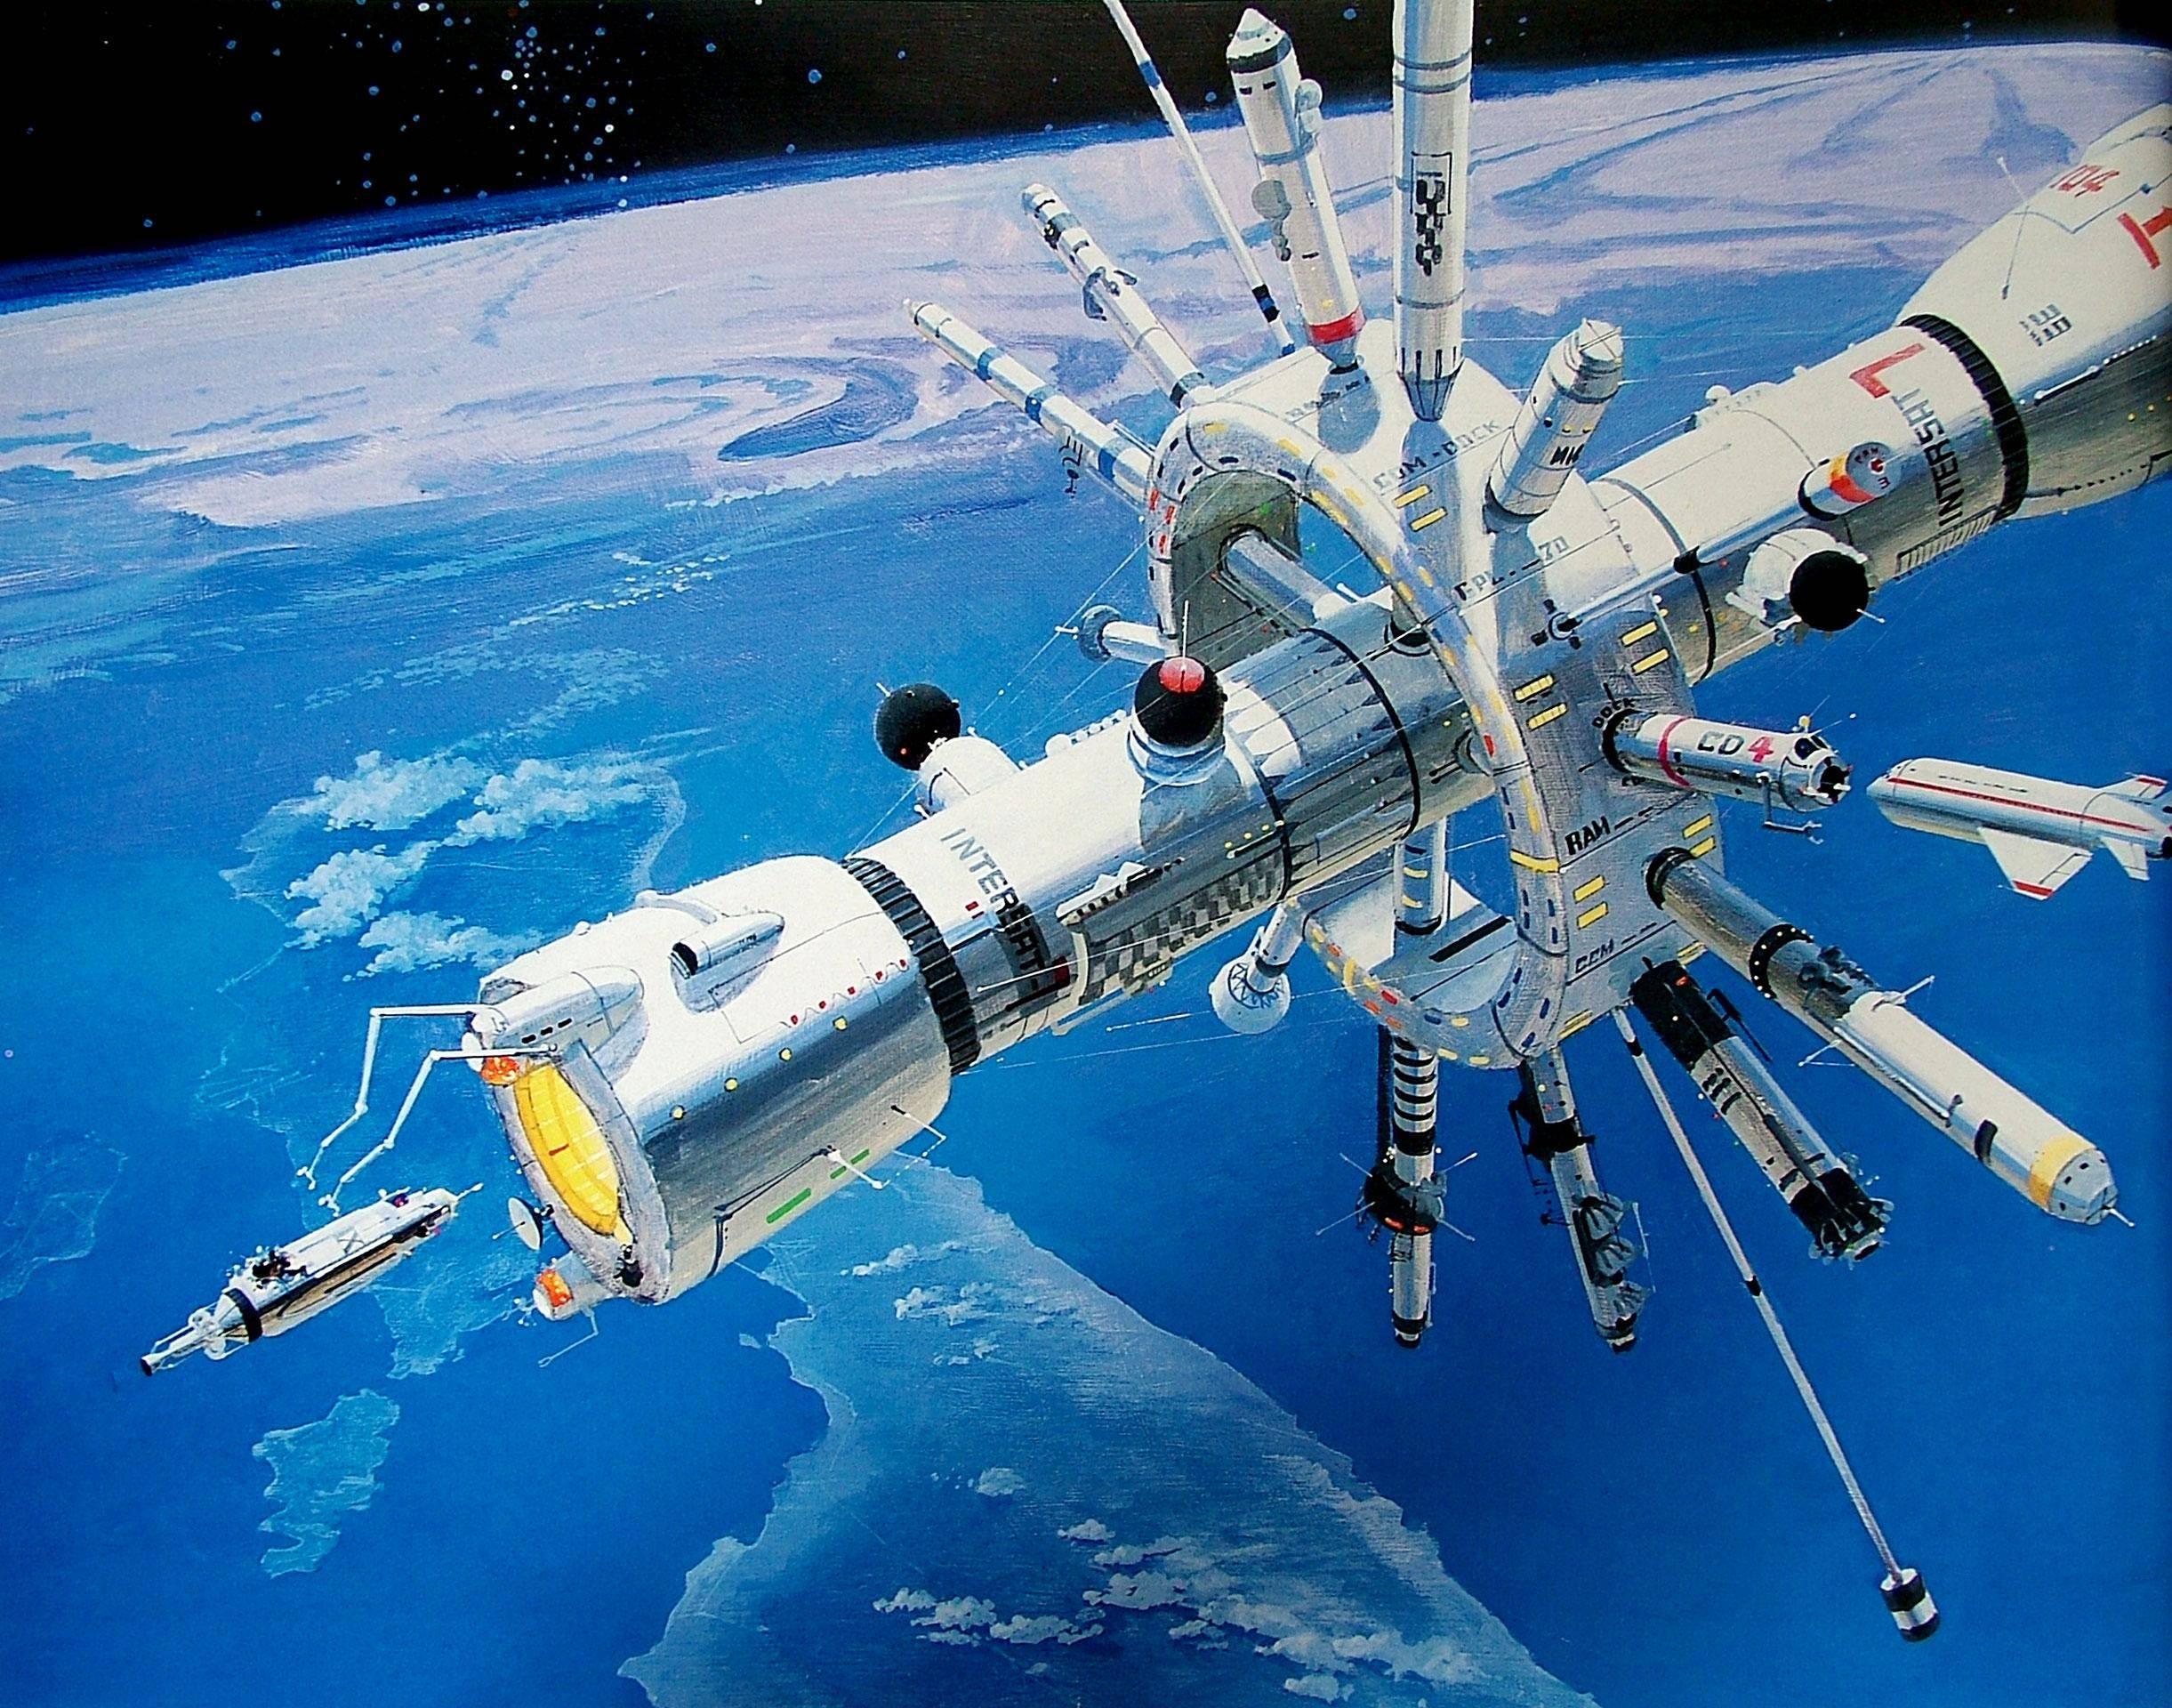 Conceptual space art sci fi art science fiction art International Space Station  - Painting by Robert McCall